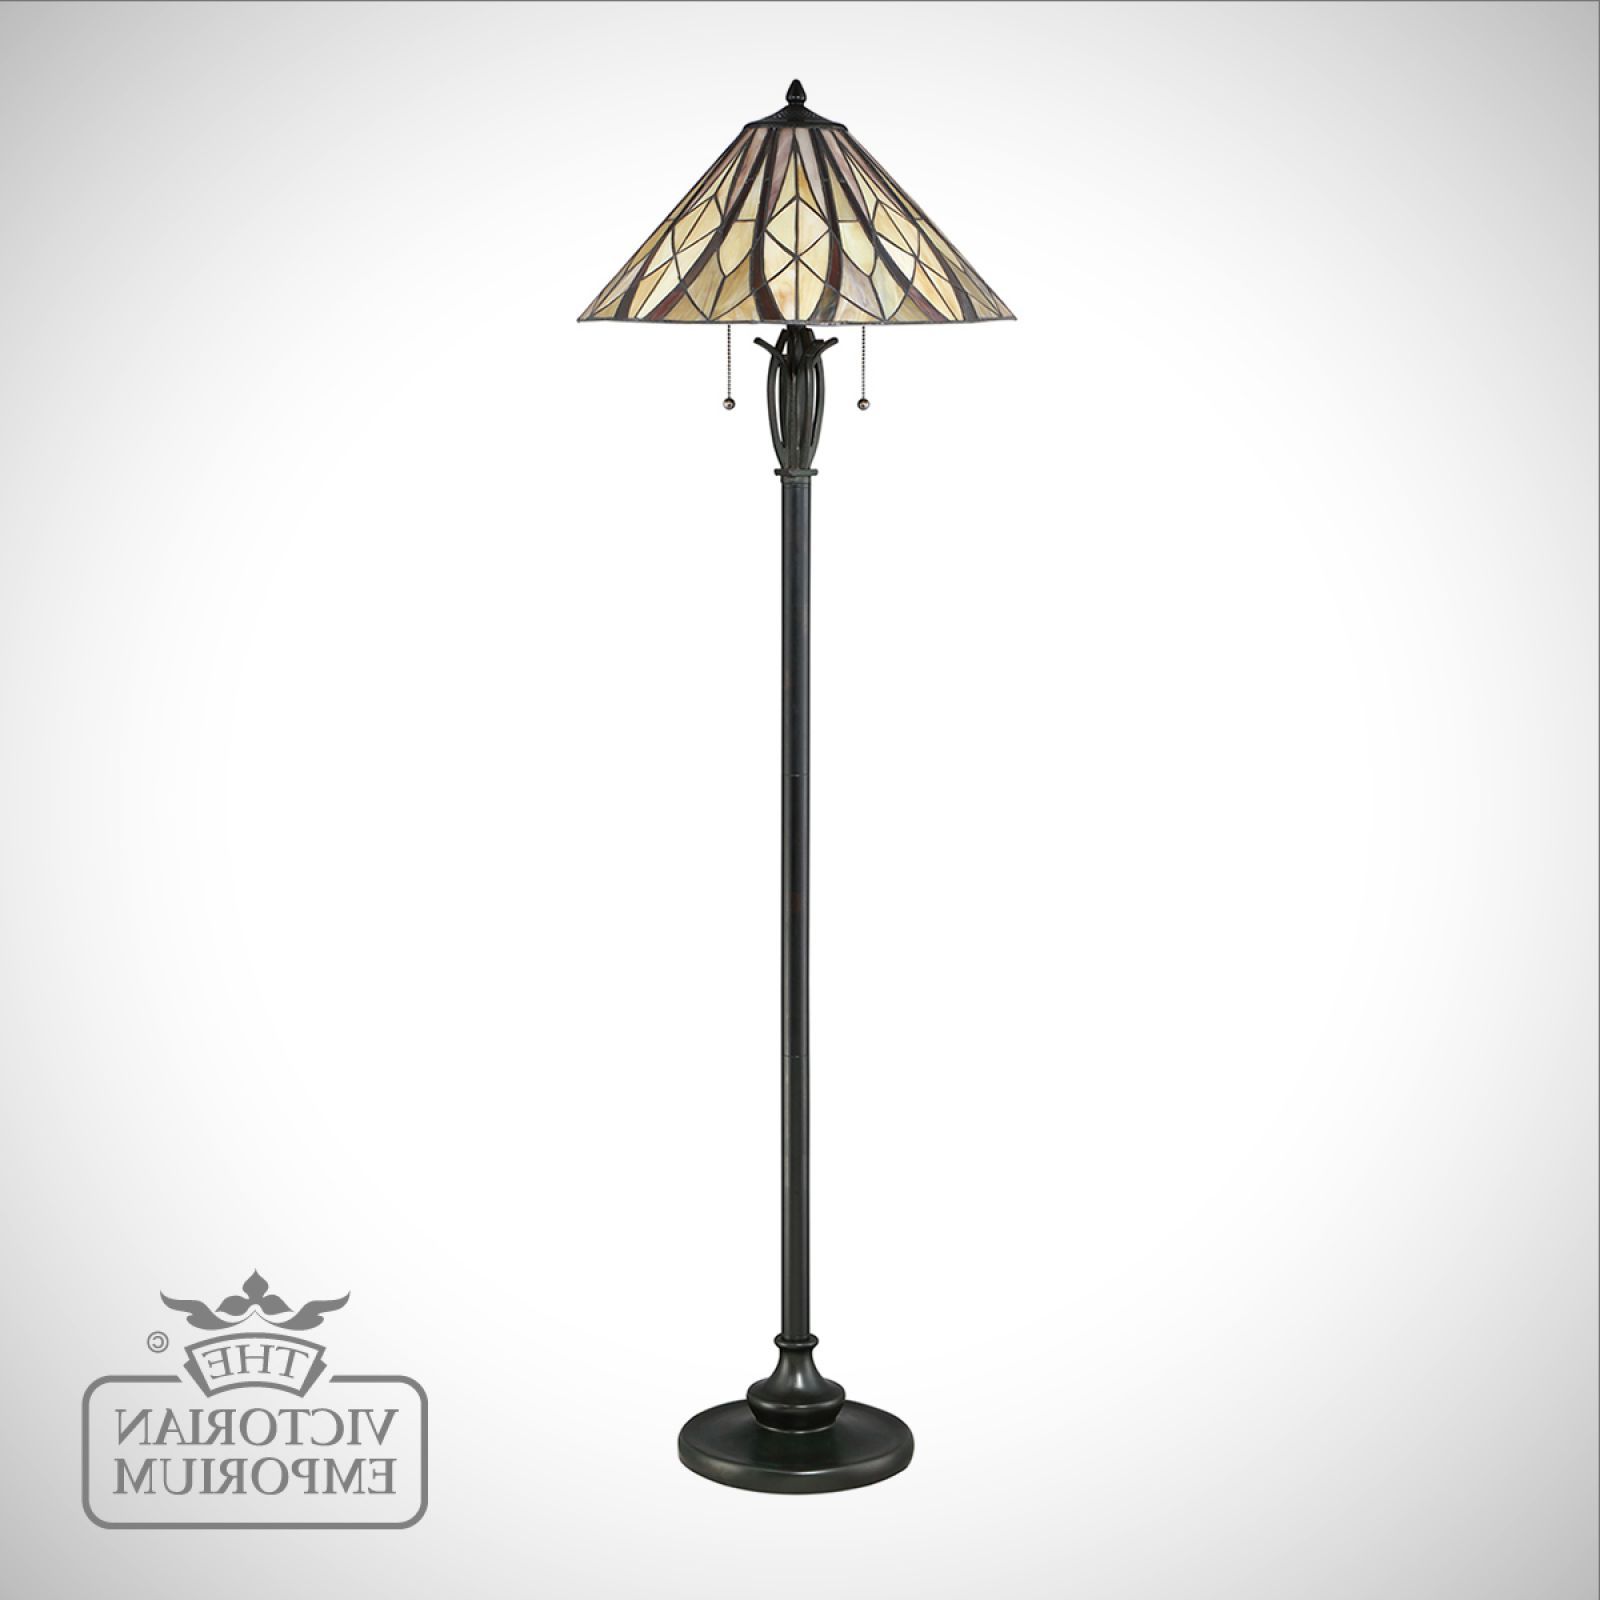 Tiffany Victory Floor Lamp | The Victorian Emporium Within Beeswax Finish Floor Lamps (View 17 of 20)